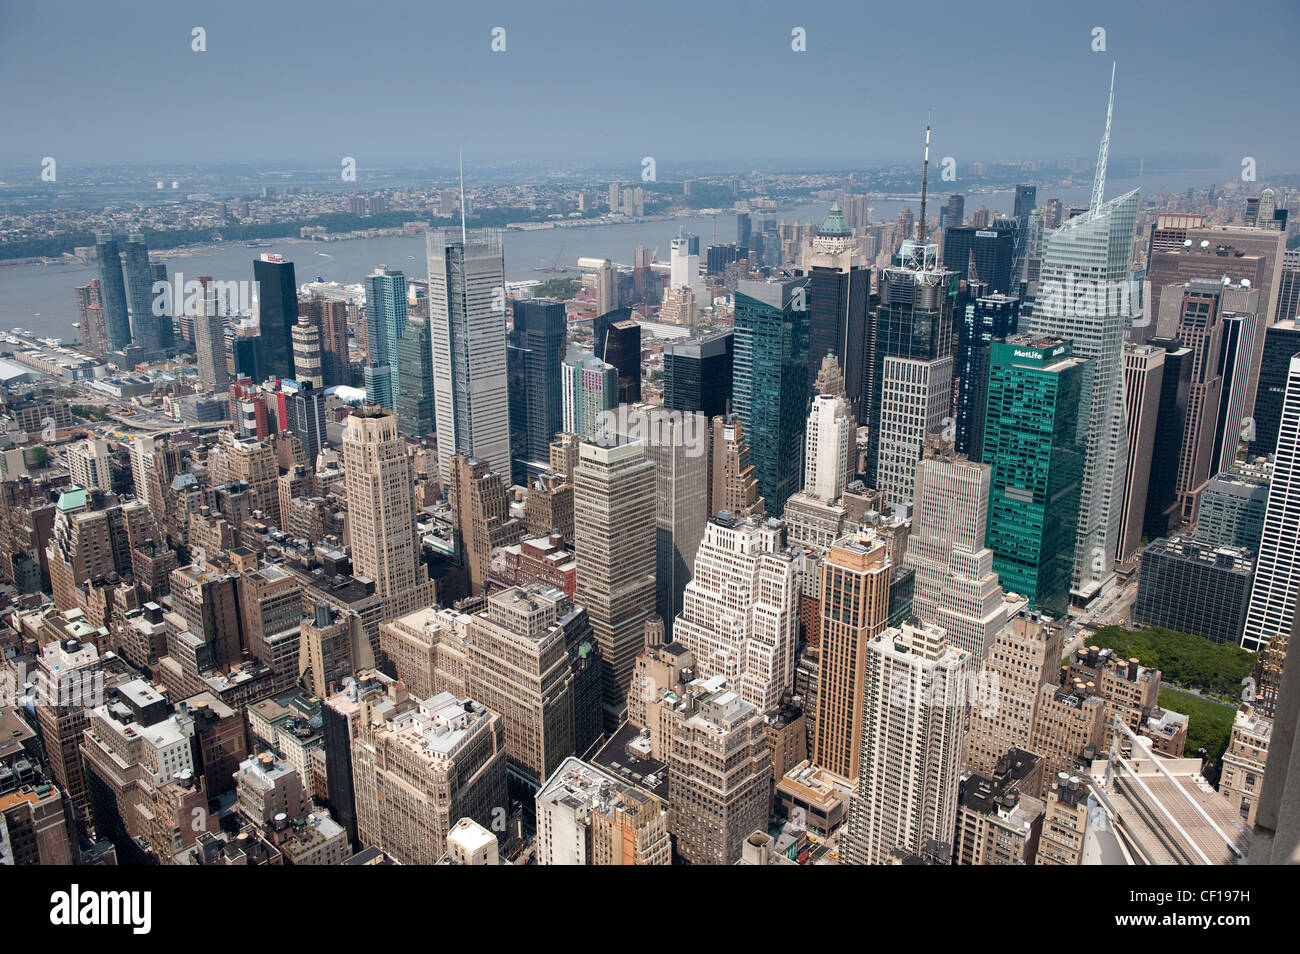 View over Manhatten Island from the Empire State Building. New York, USA Stock Photo